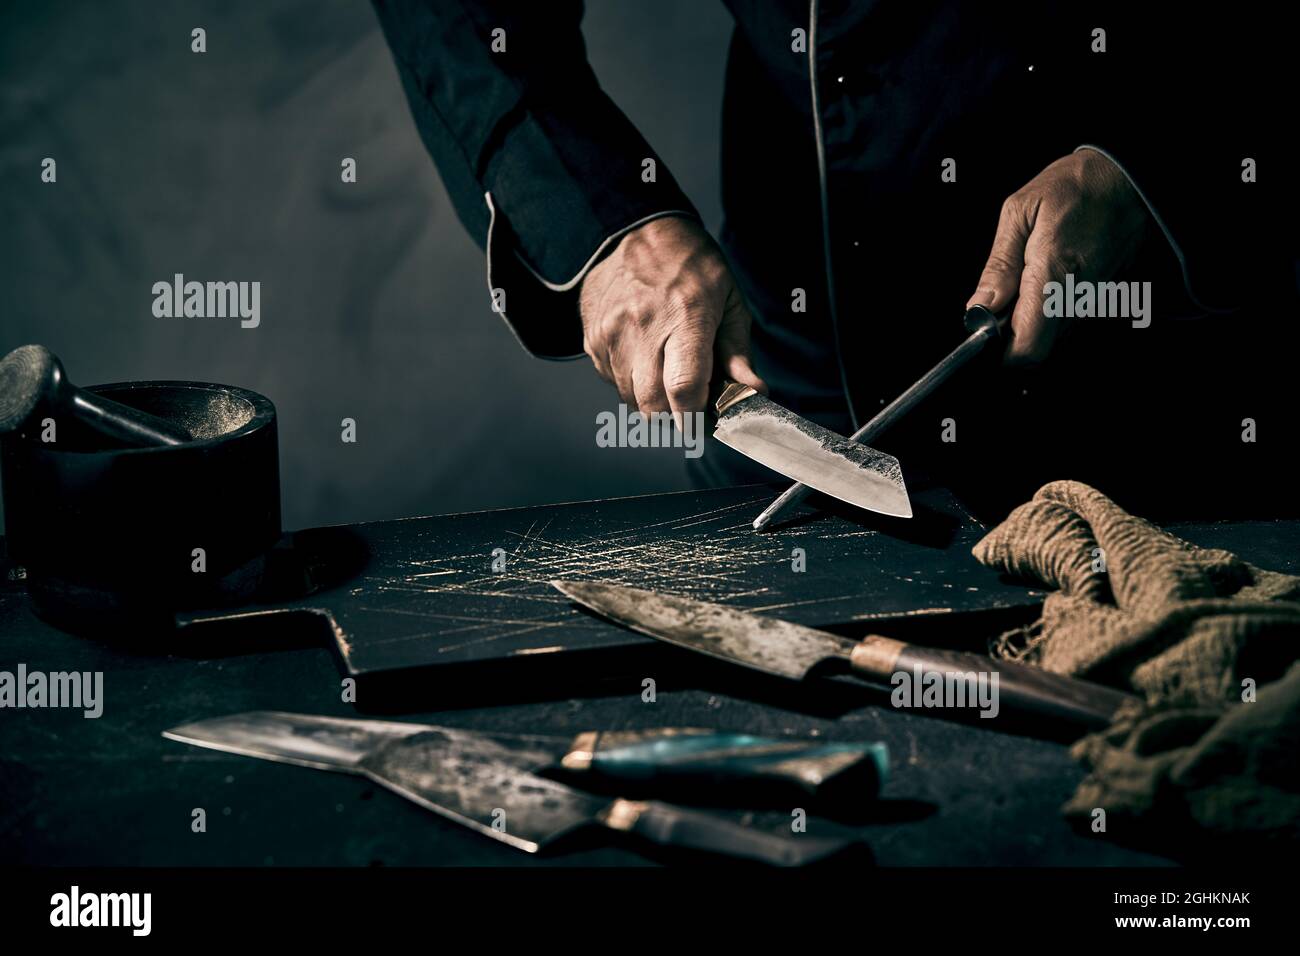 https://c8.alamy.com/comp/2GHKNAK/chef-or-butcher-sharpening-his-knife-with-an-old-fashioned-handheld-metal-file-over-on-old-black-cutting-board-in-low-angle-in-dim-light-with-copyspac-2GHKNAK.jpg